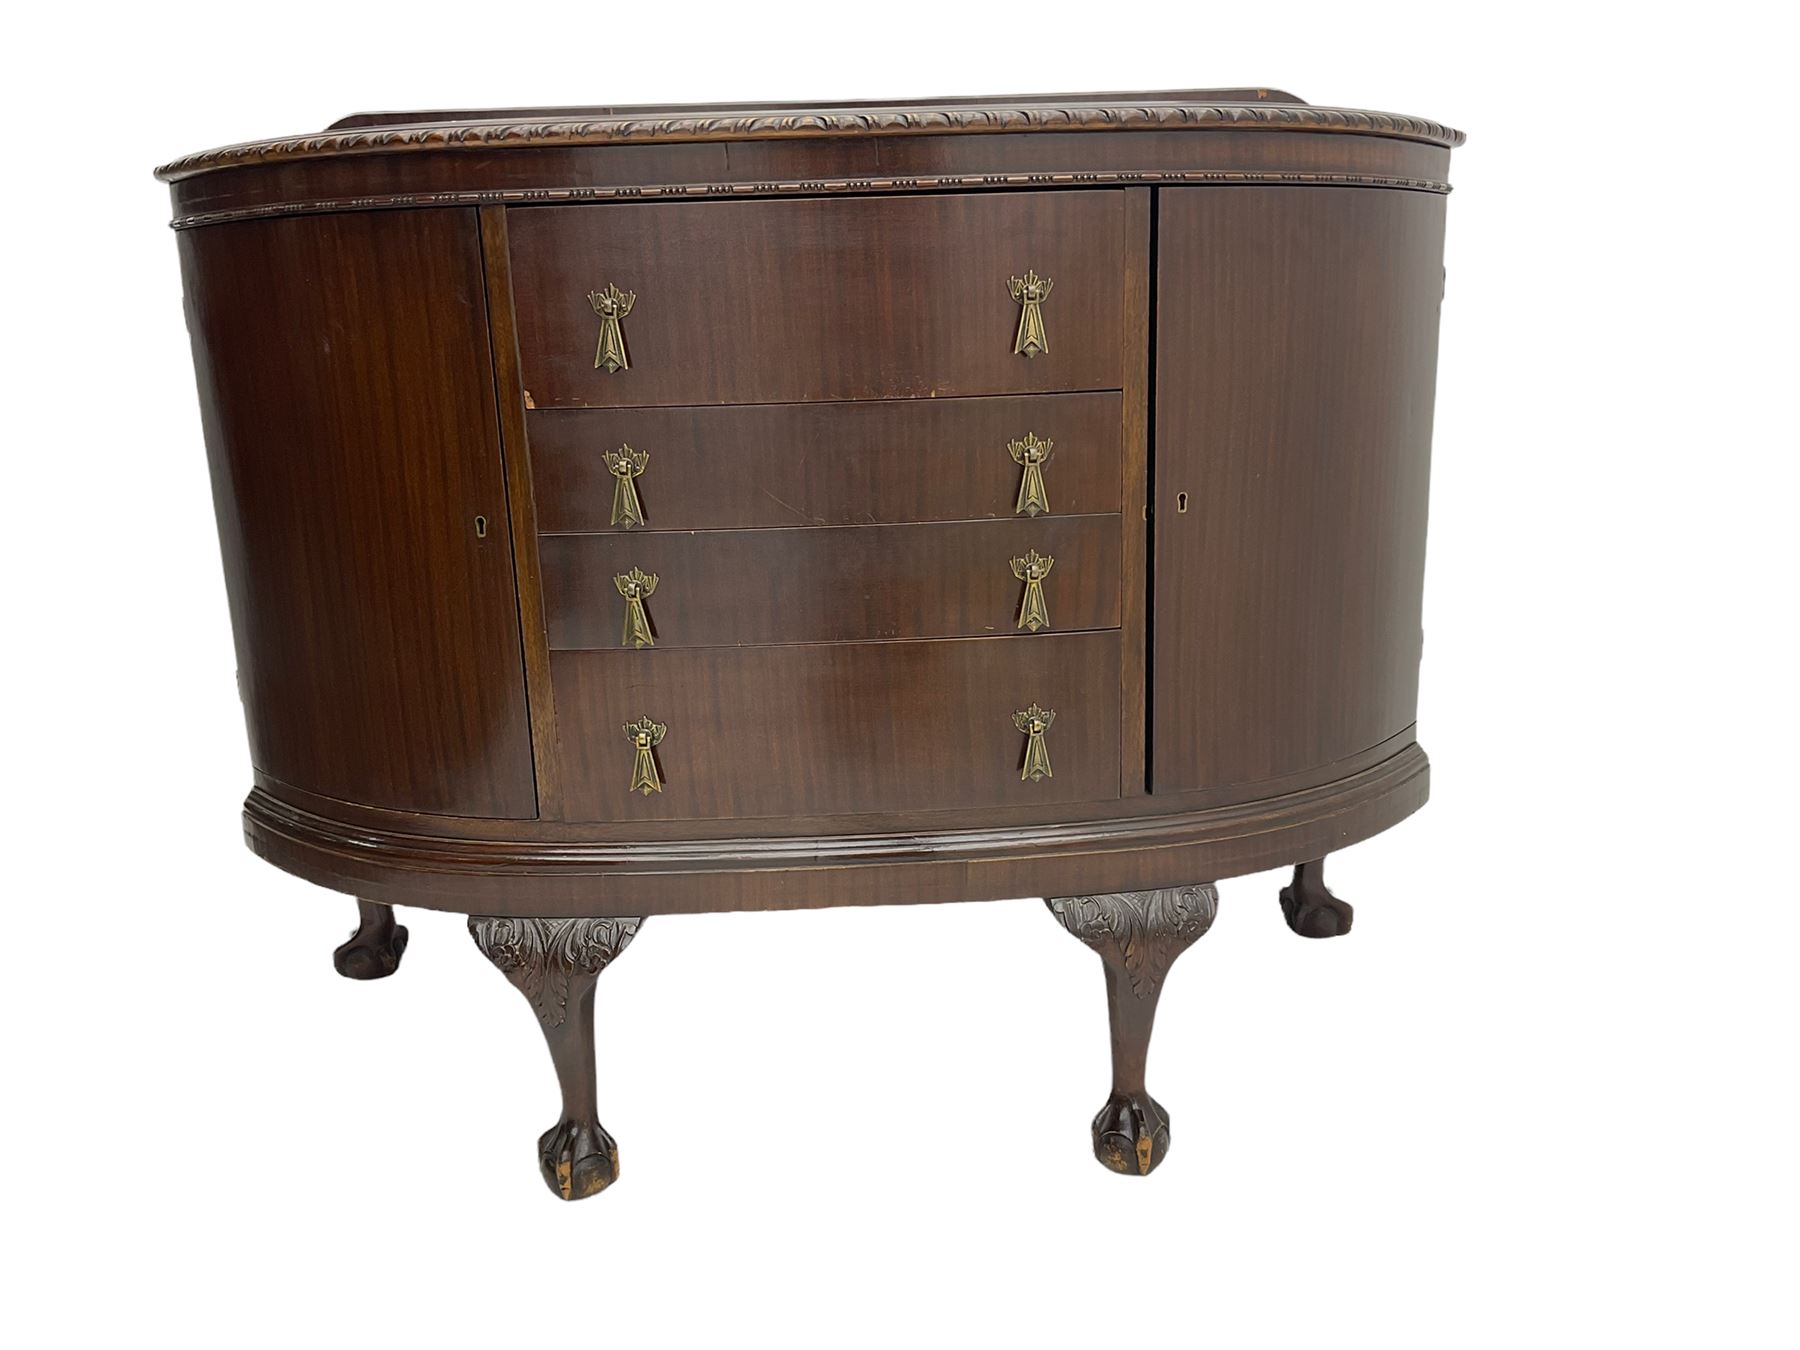 Mid 20th century mahogany bow front sideboard - Image 3 of 3